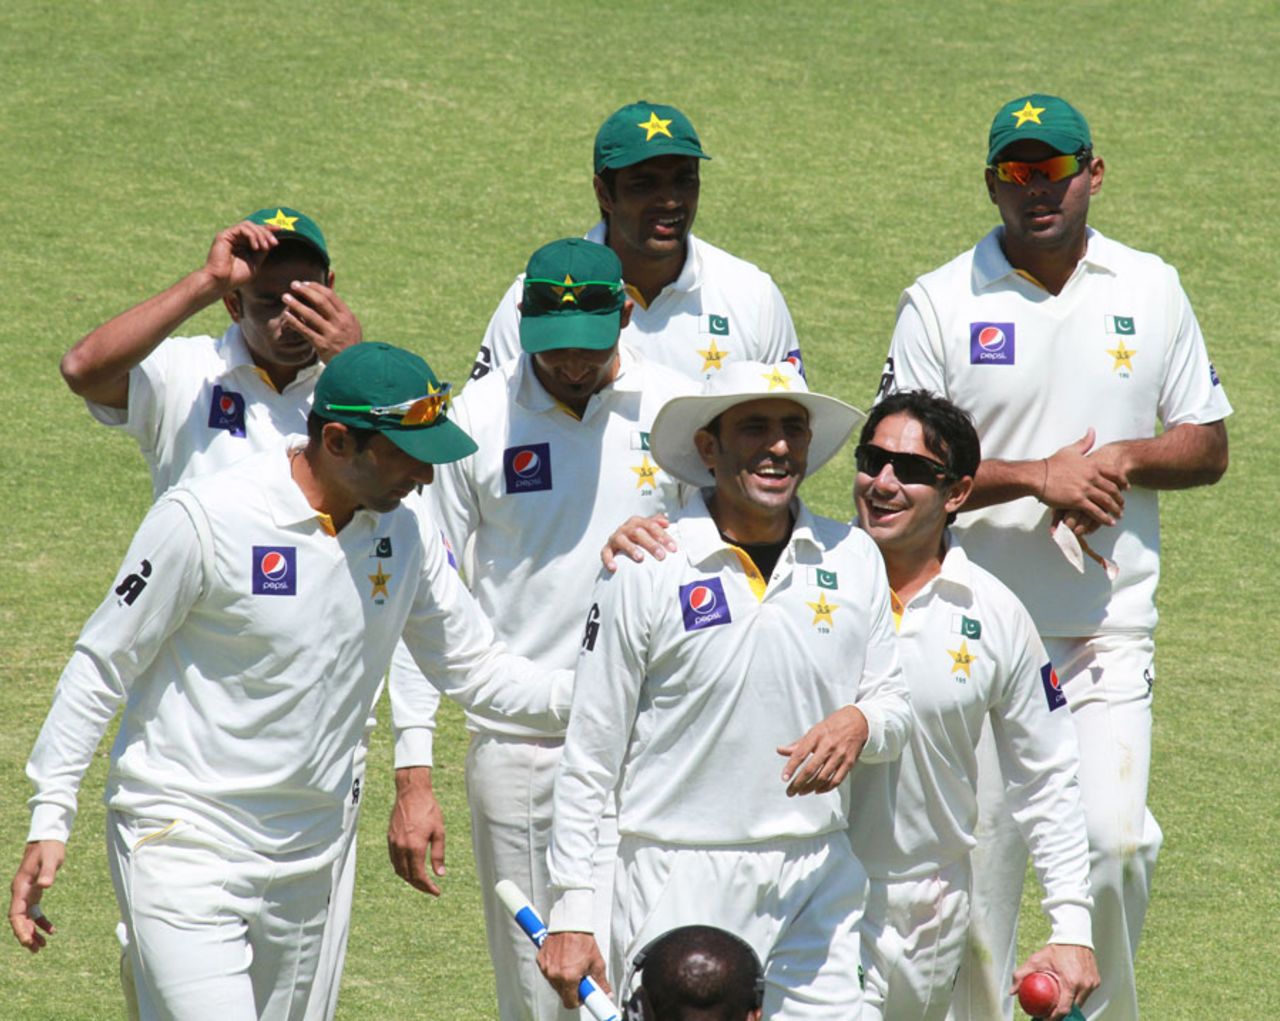 Younis Khan and Saeed Ajmal lead the players off the field after the win, Zimbabwe v Pakistan, 1st Test, 5th day, Harare, September 7, 2013